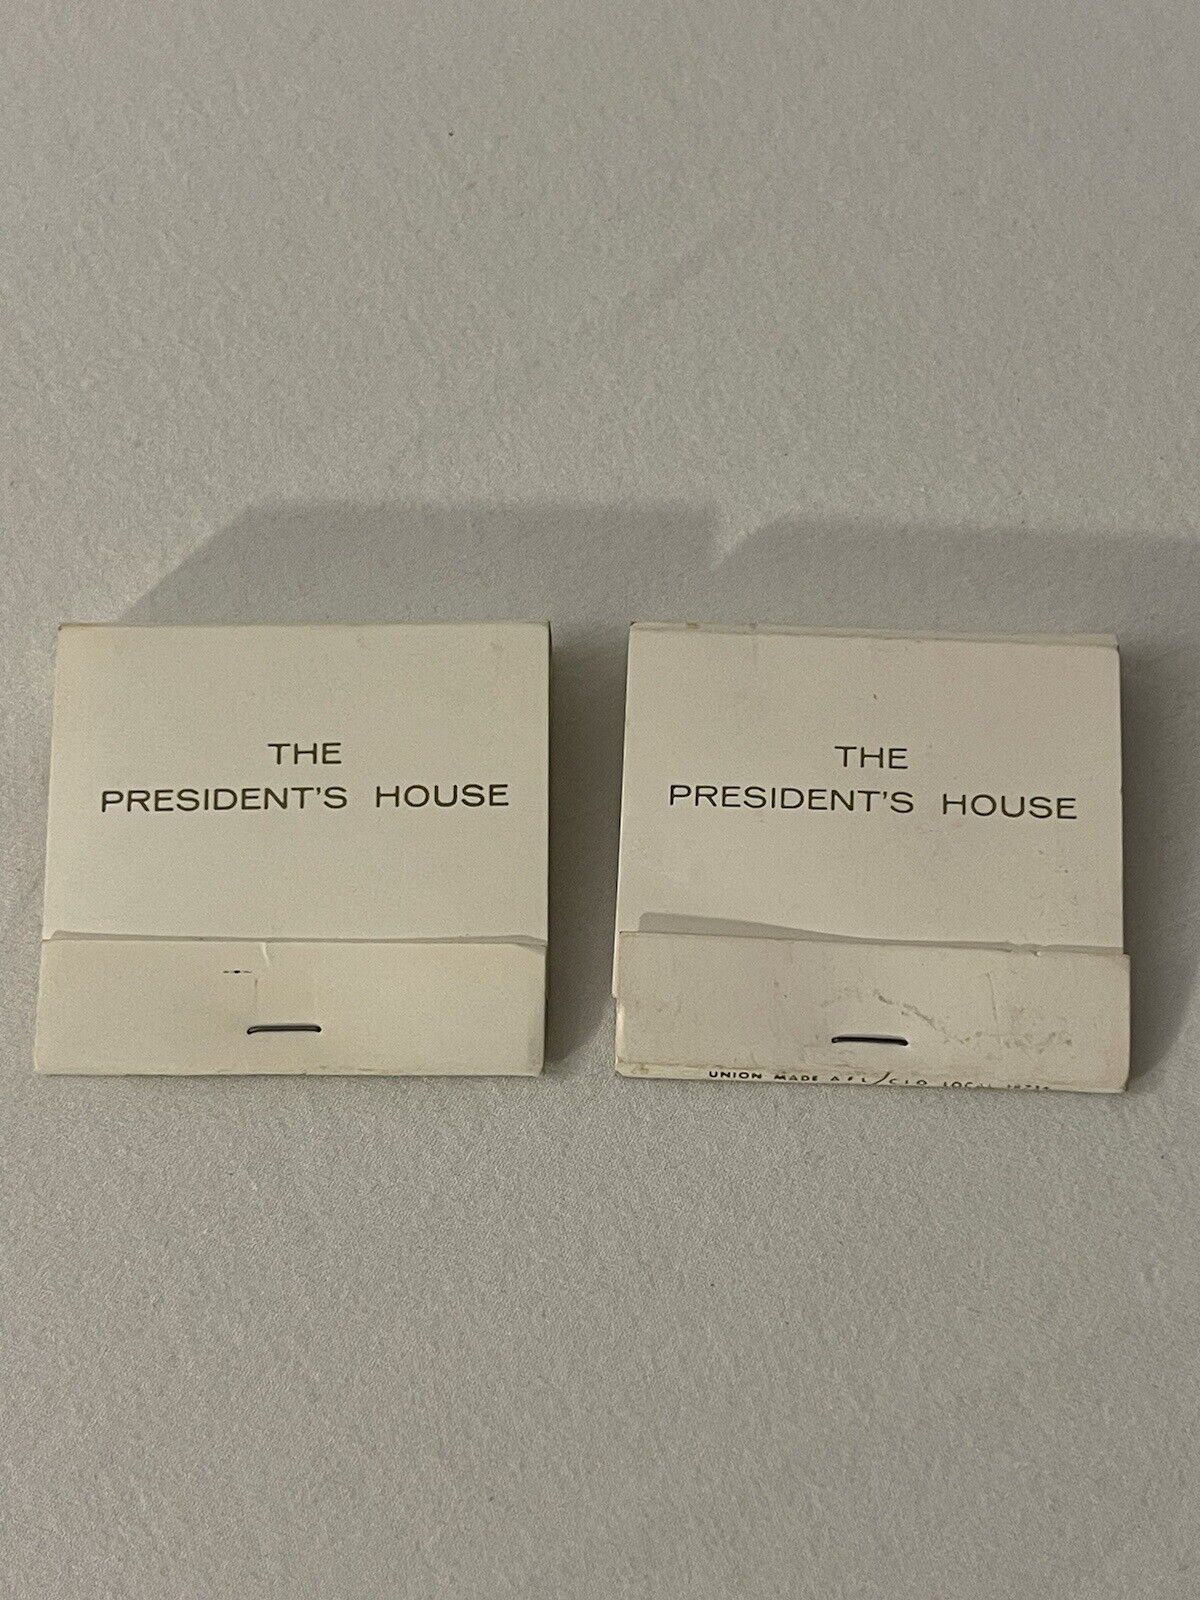 PRESIDENT\'S HOUSE / Official White House Matches / used / 1960s